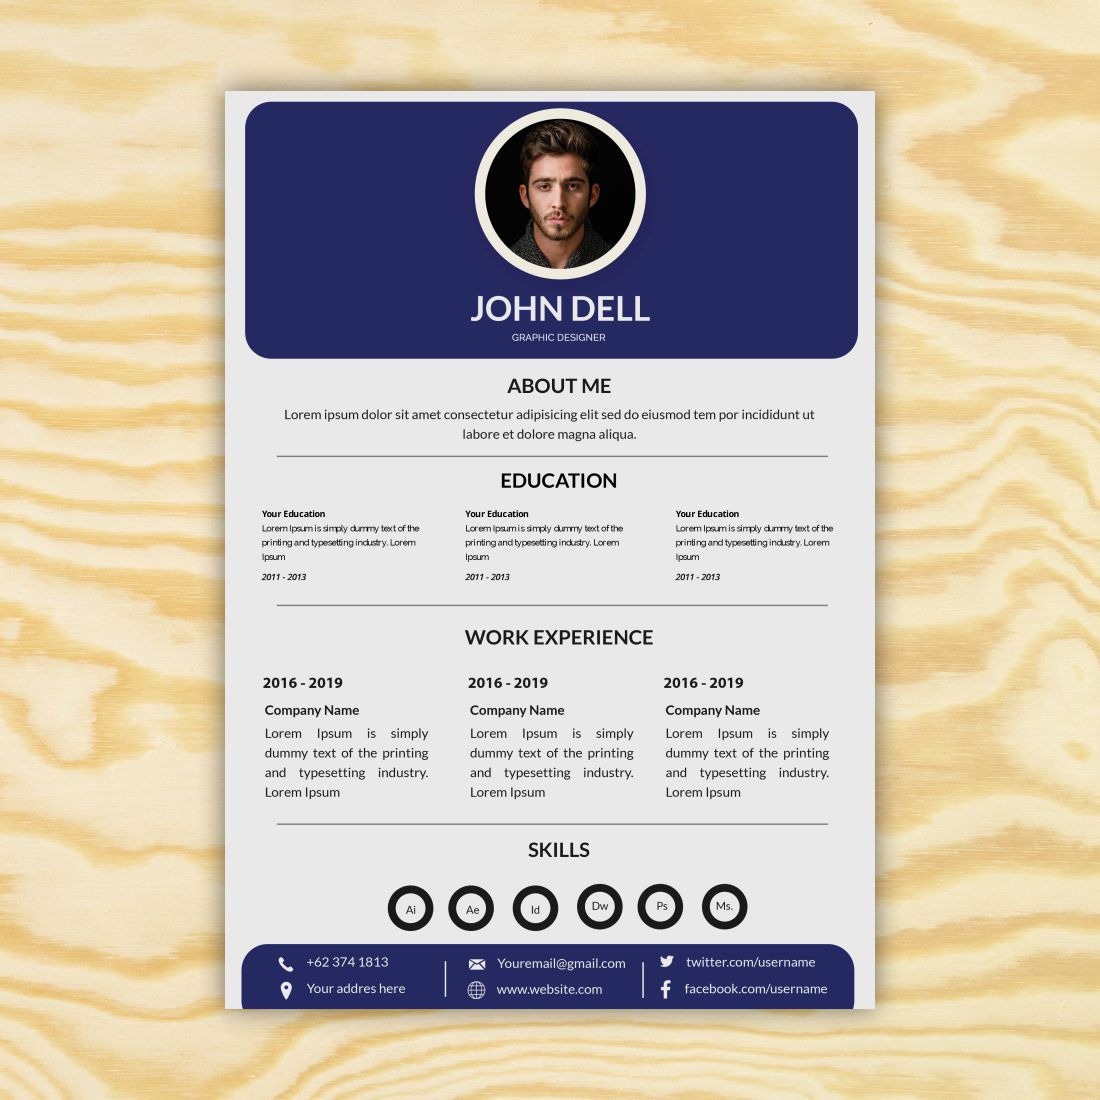 CV/Resume Design For Graphic Design and only for one page.